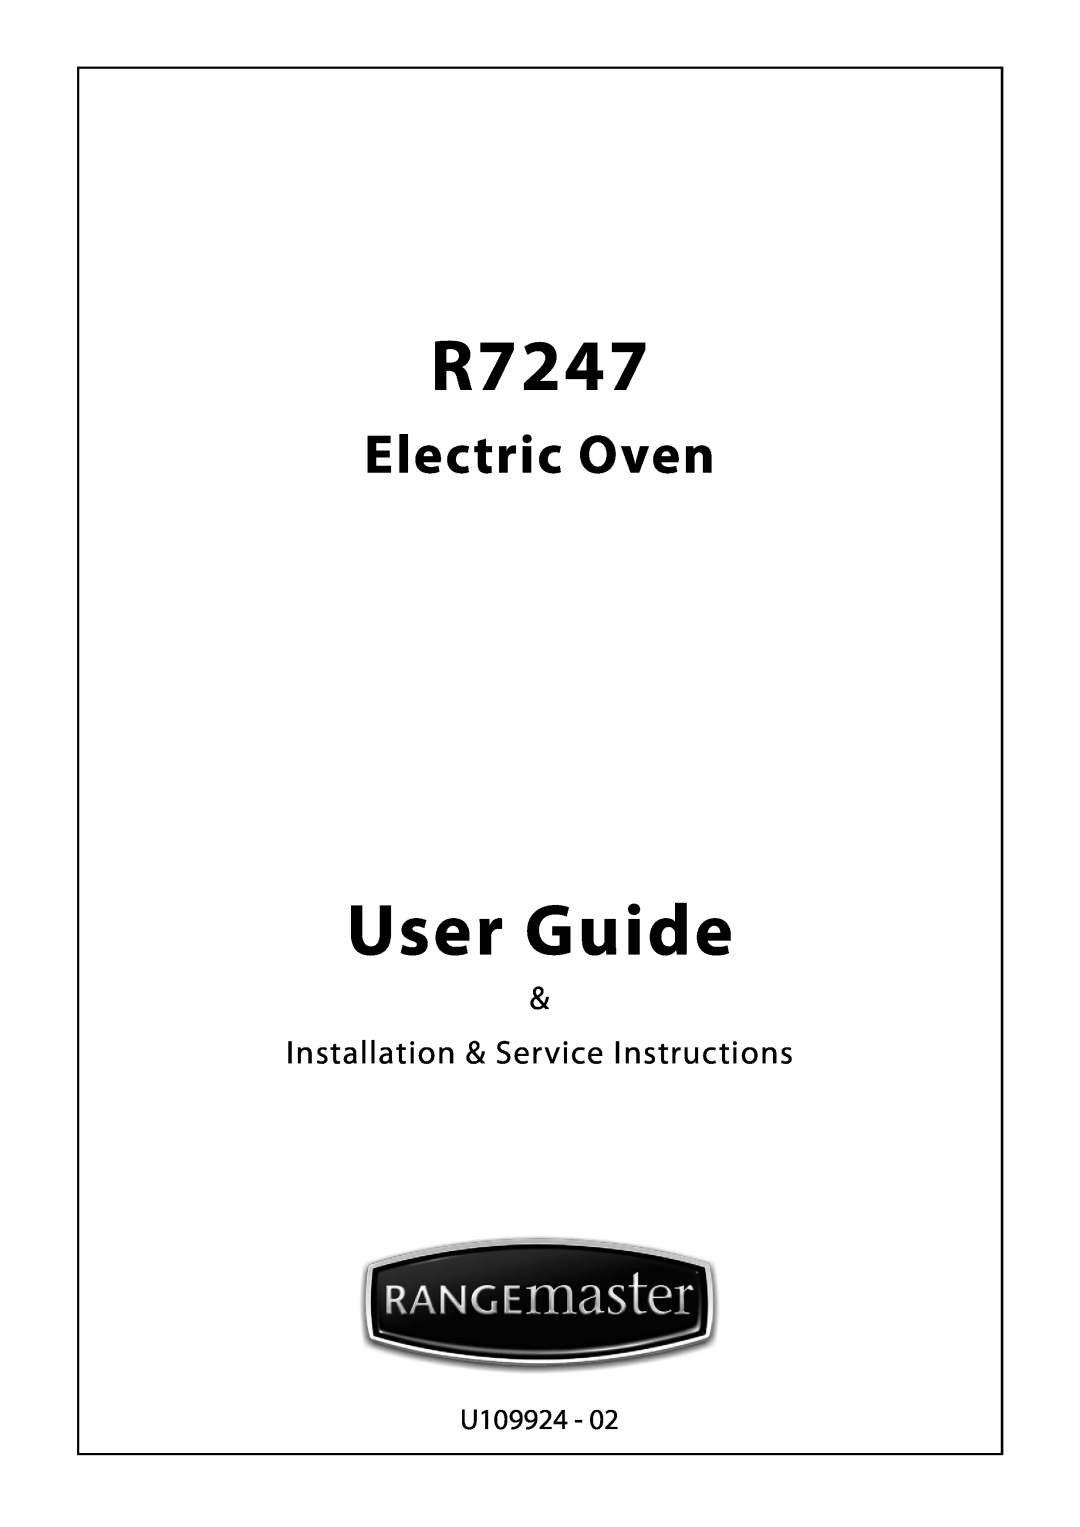 Rangemaster R7247 manual User Guide, Electric Oven, Installation & Service Instructions, U109924 